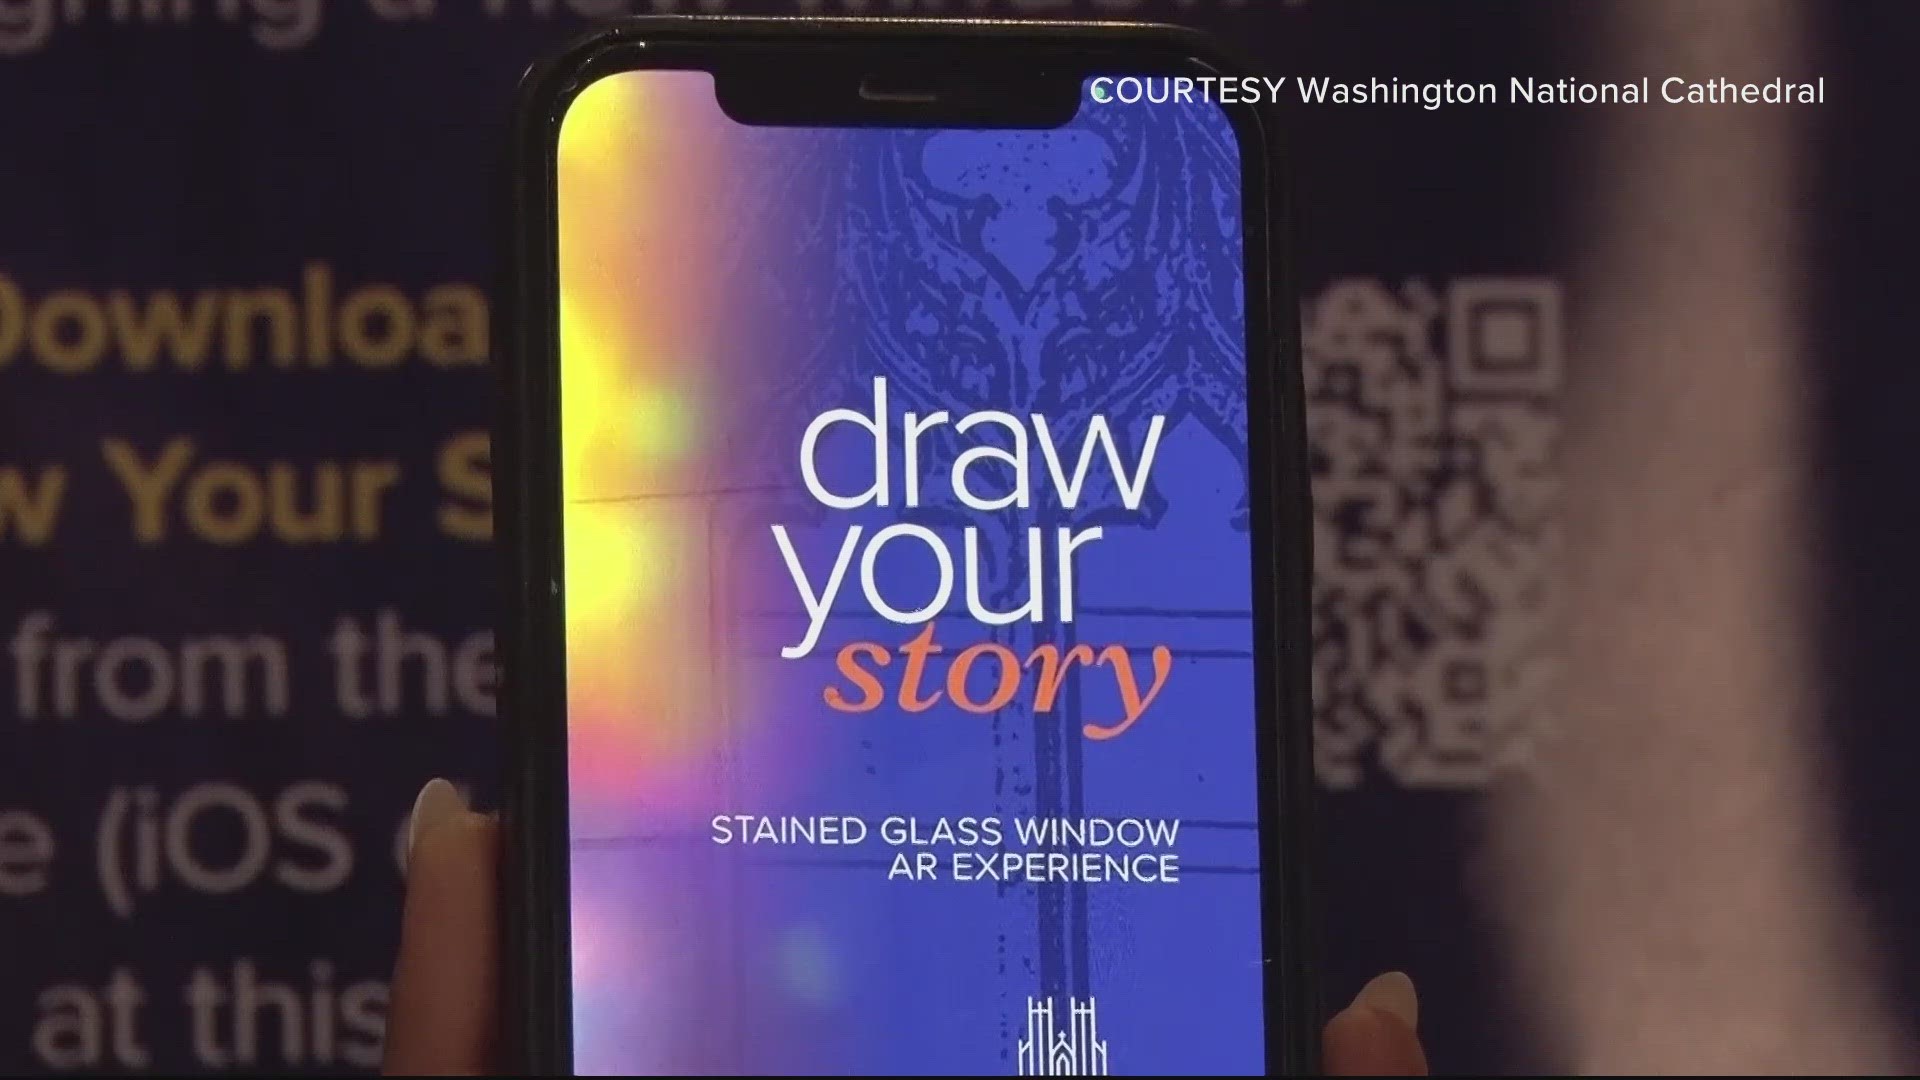 The Washington National Cathedral lets you share your art on stained glass using a new app. Here's how it works.